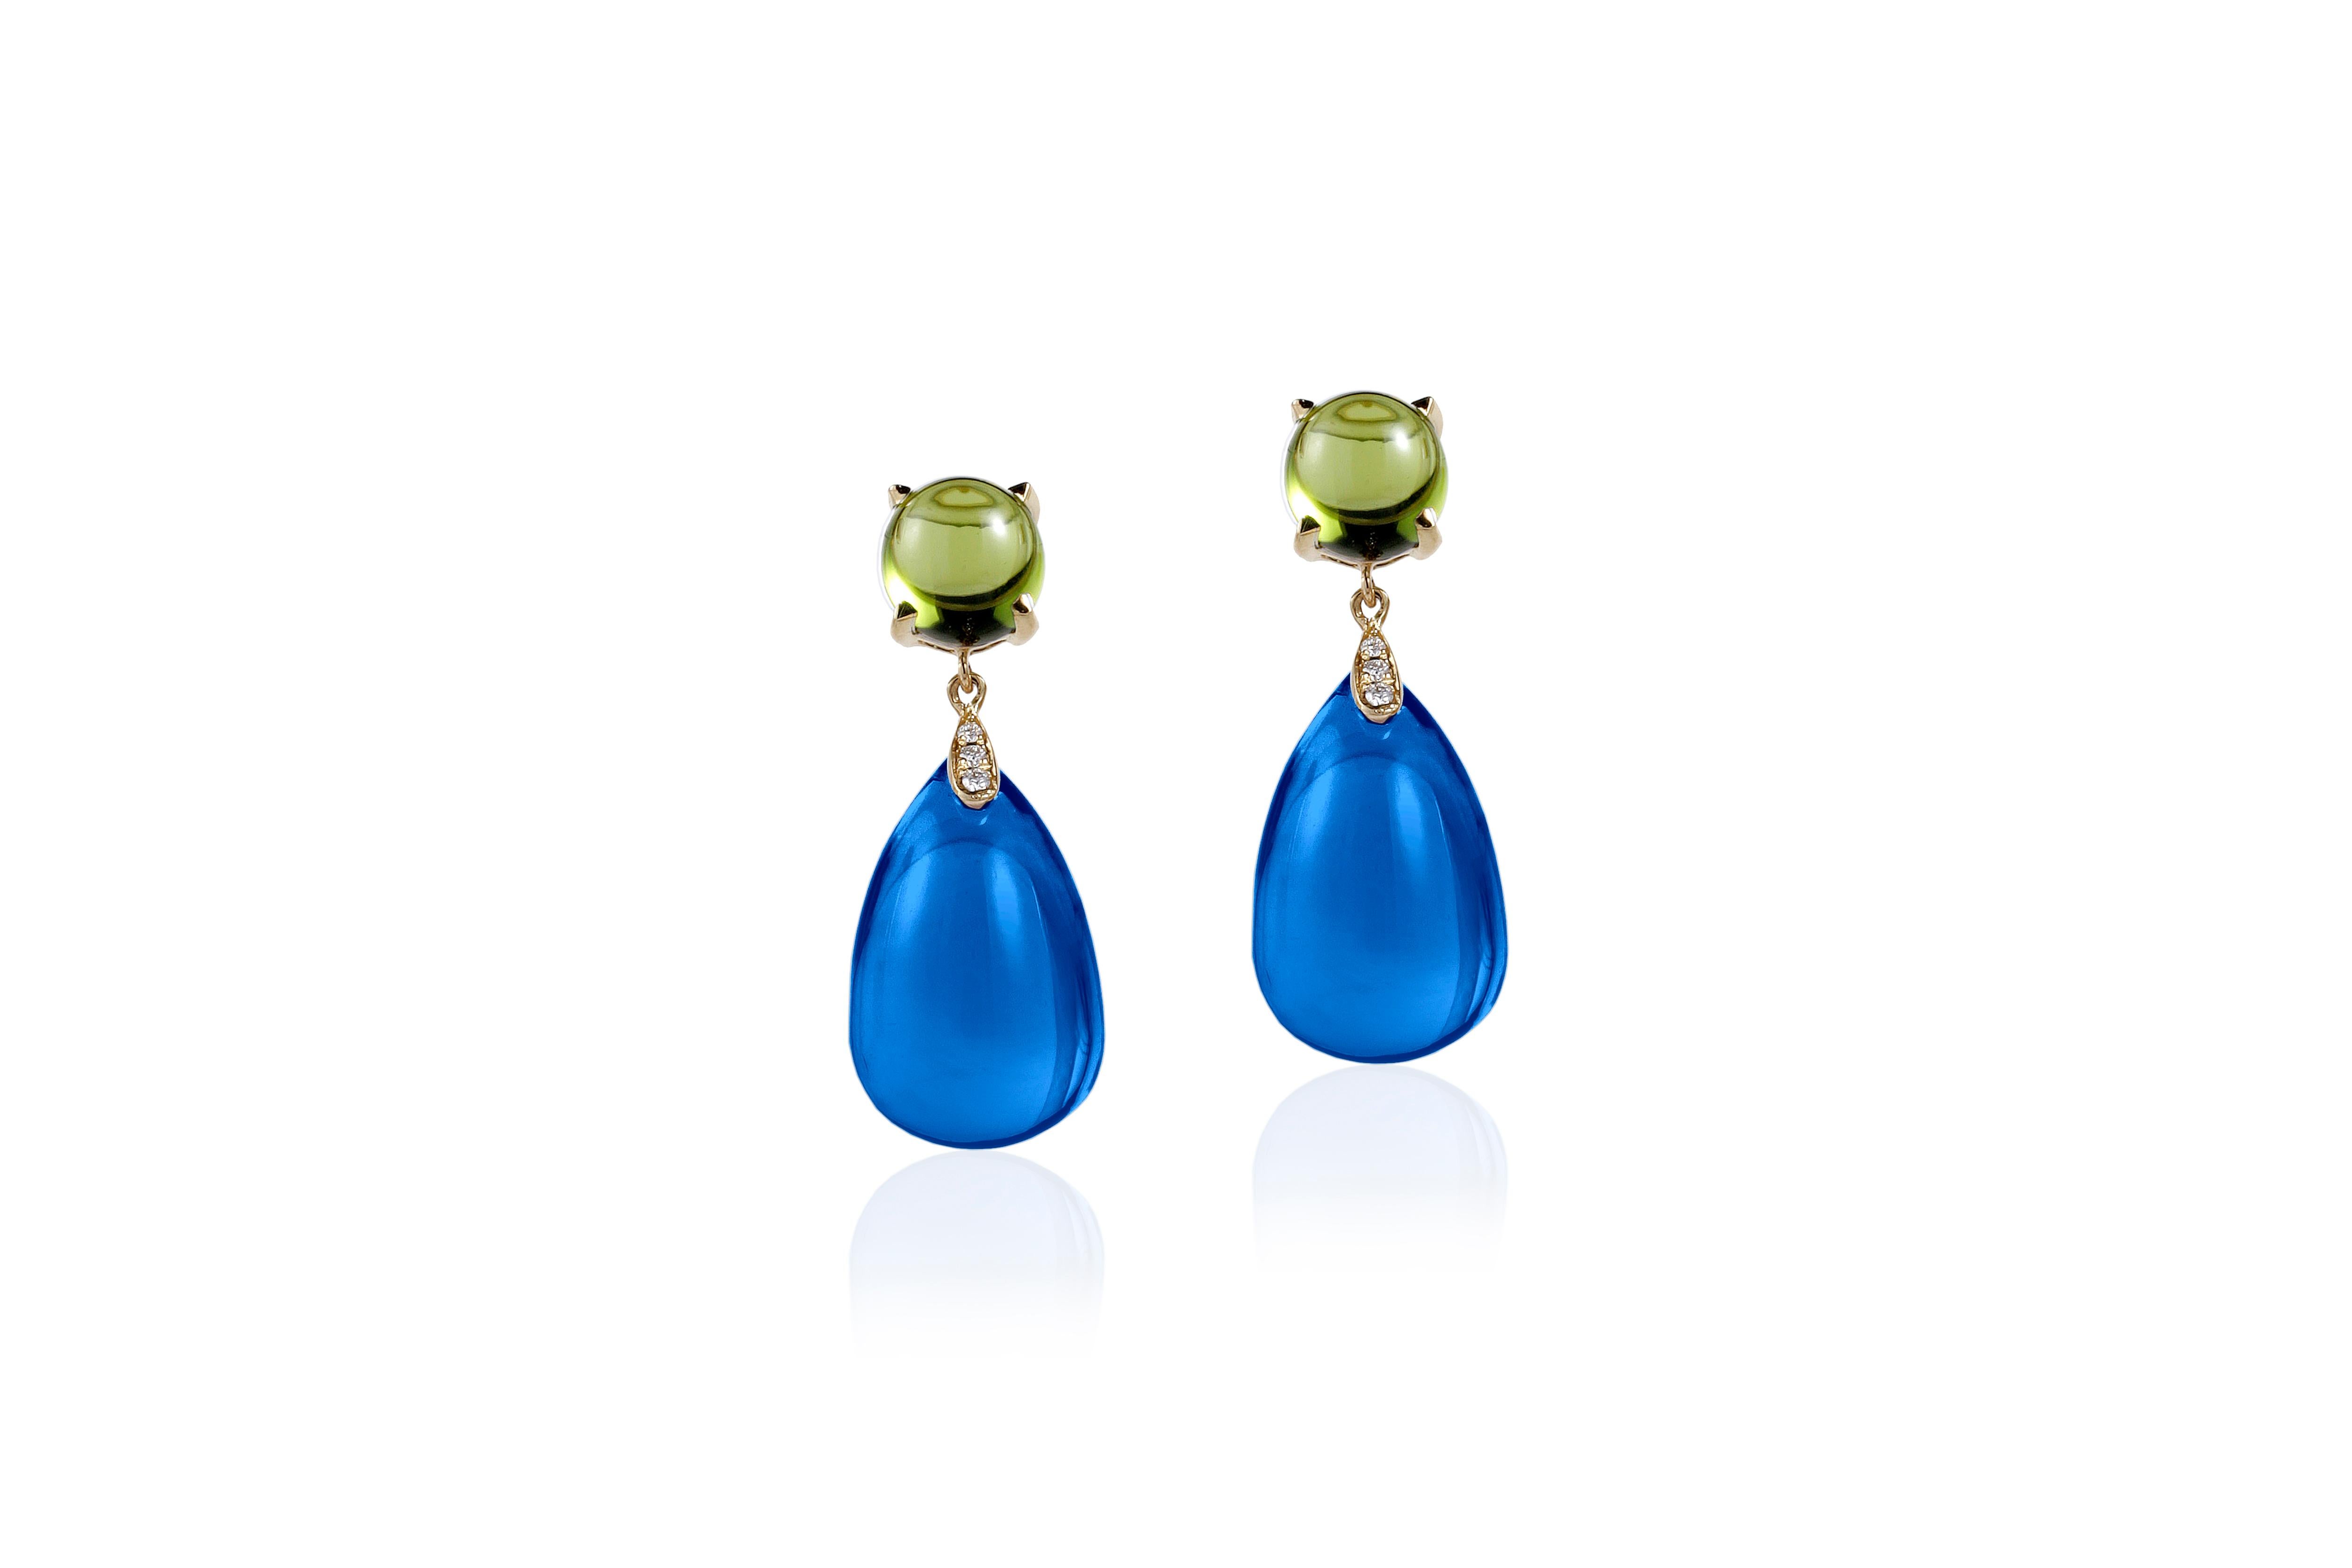 London Blue Topaz-Peridot Cabochon & Drop Earrings with Diamonds in 18K Yellow Gold, from 'Naughty' Collection

Stone Size: 19 x 12 mm & 8 mm 

Gemstone Approx Wt London Blue Topaz-45.46 Carats
                                                       